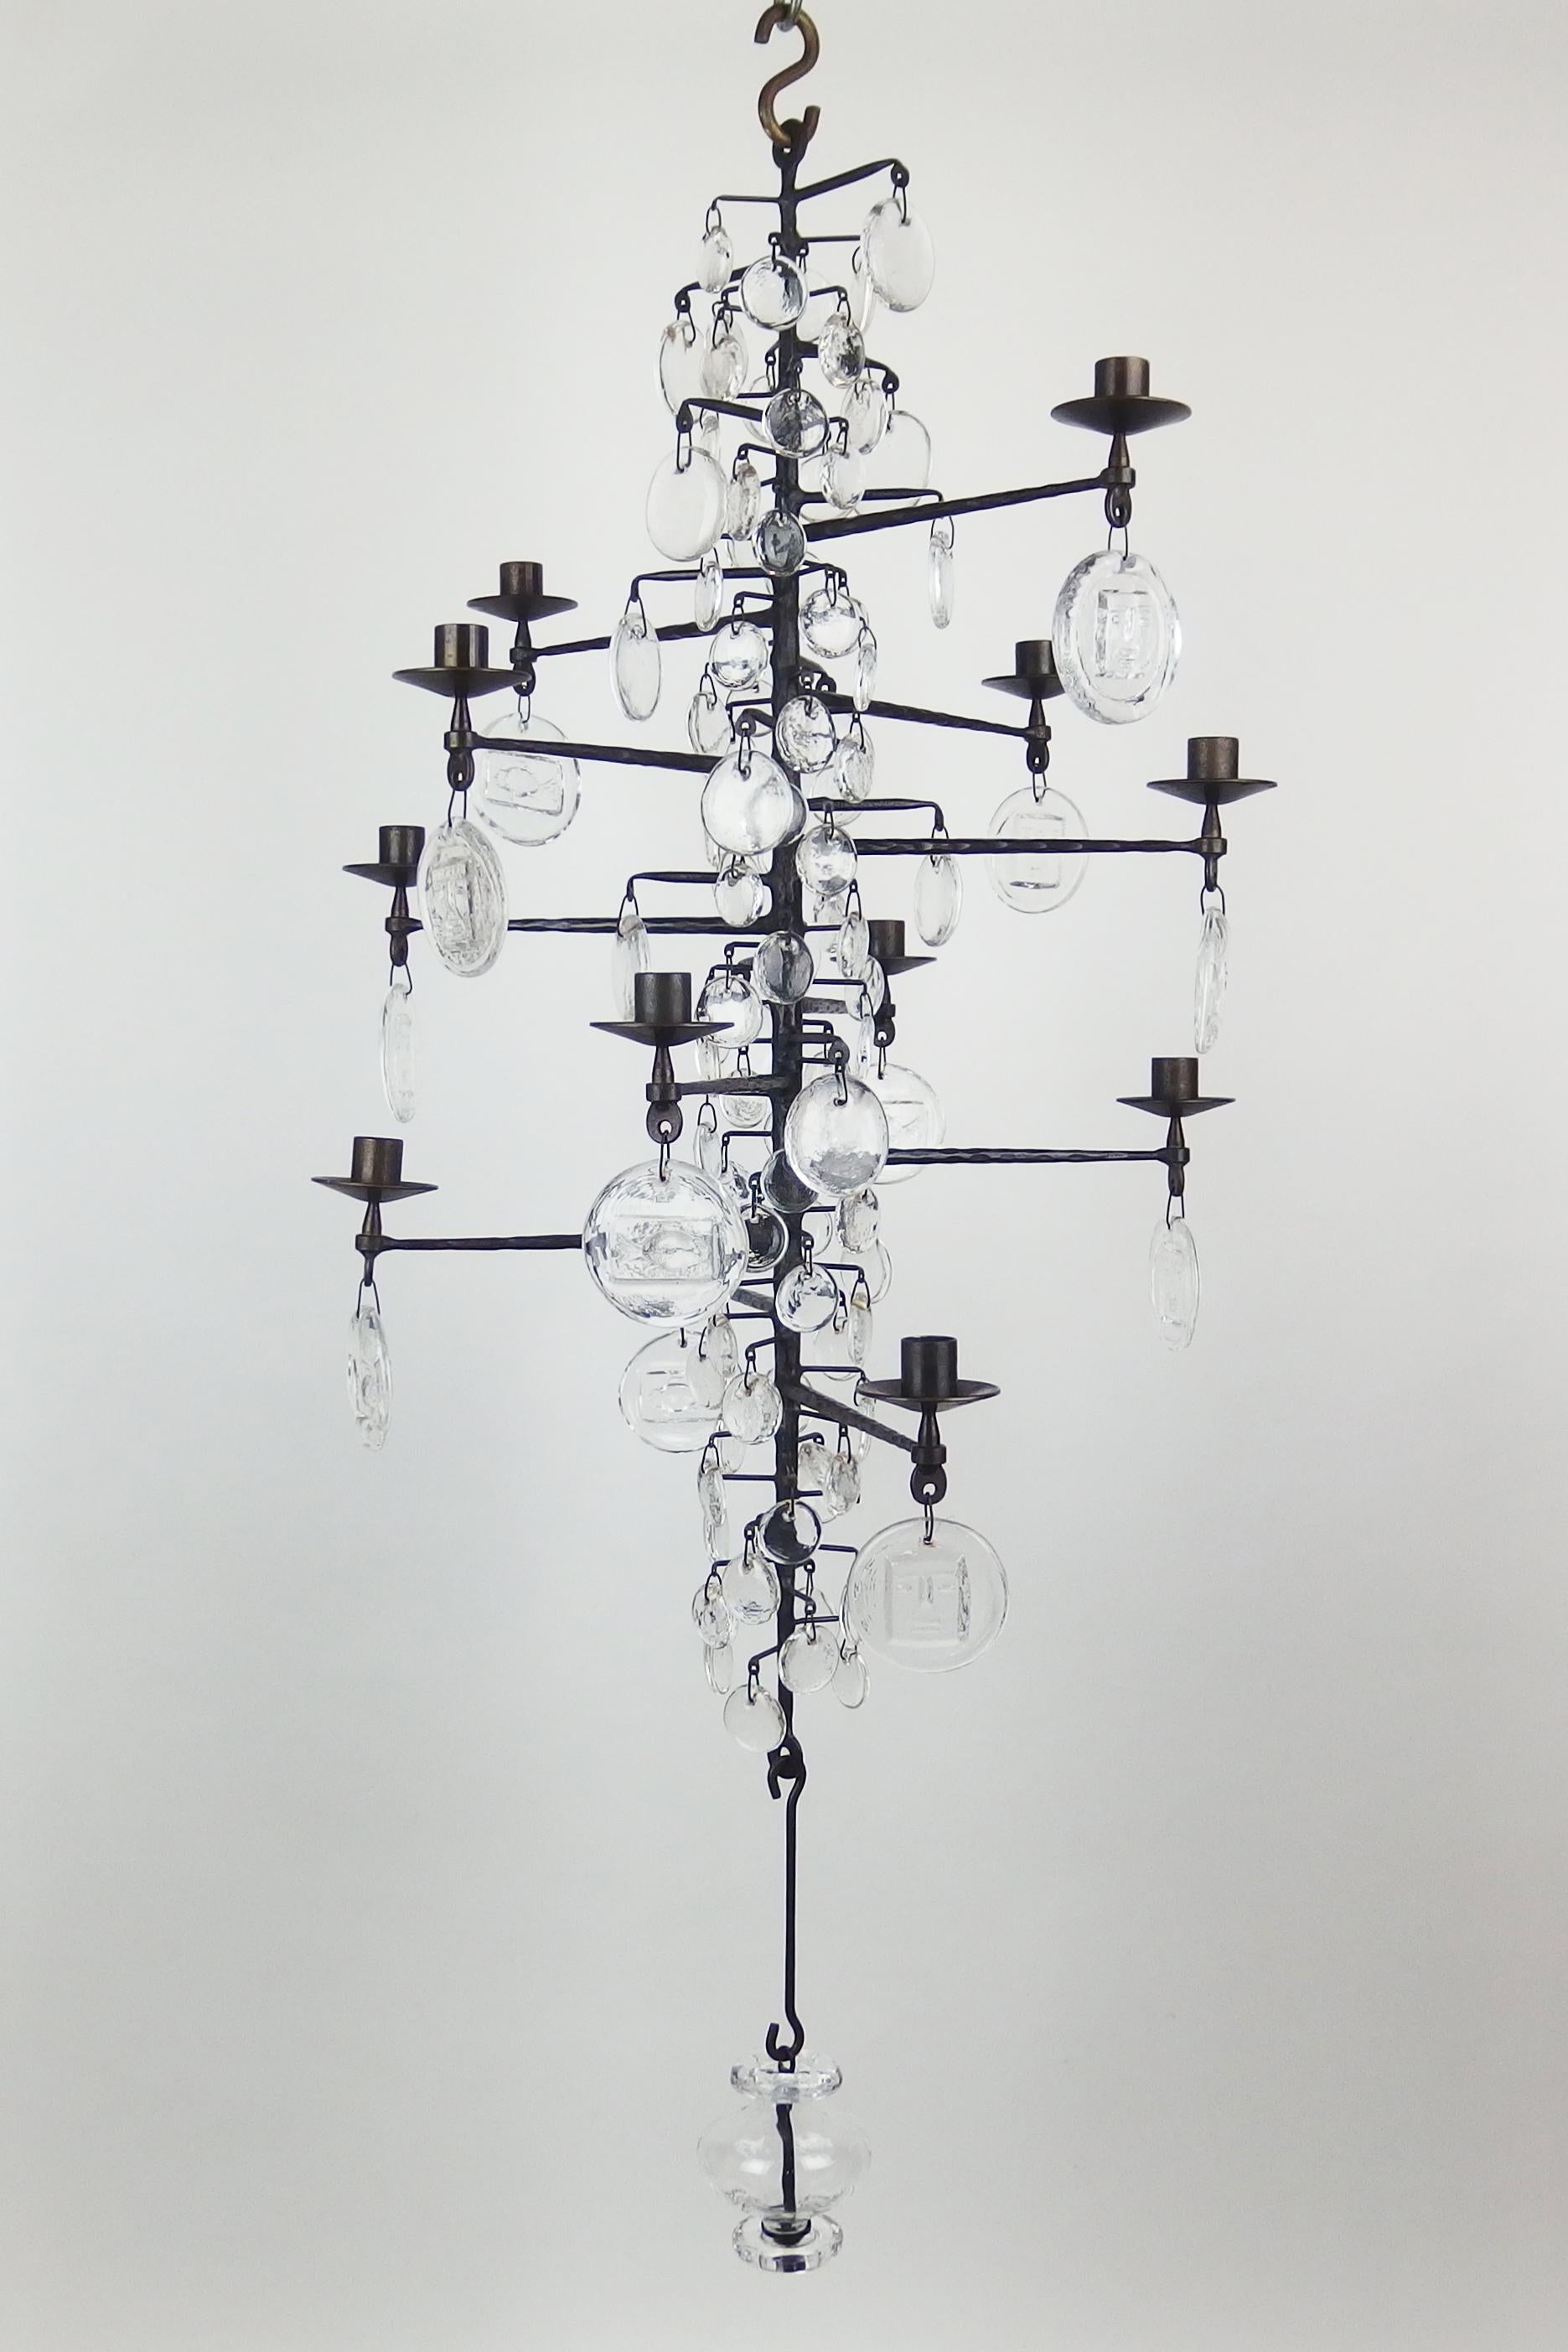 A dark grey enameled cast iron candelabra chandelier with 12 arms and 3 sizes glass pendants, the larger pendants with stylized face or fish patterns. Made by Boda Smide for Erik Hoglund.